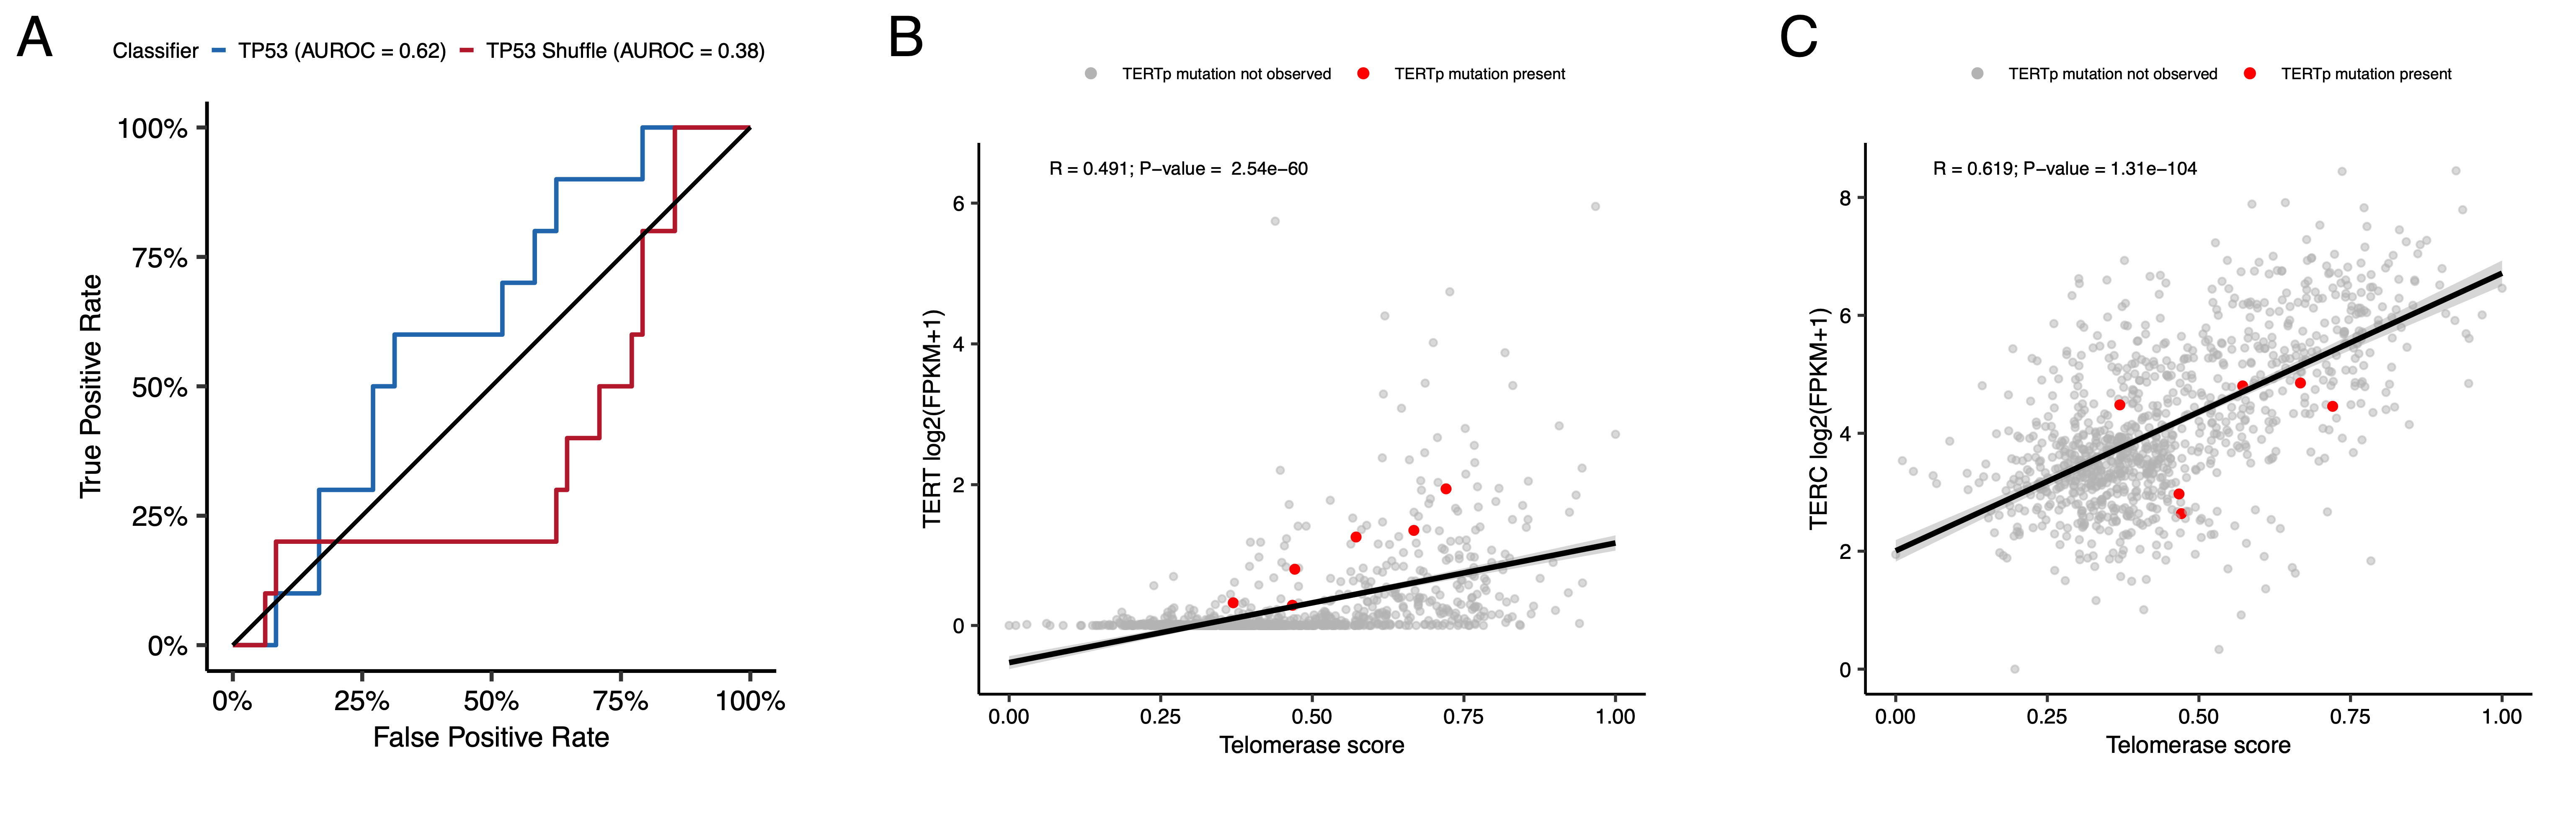 Figure S5: Quality control metrics for TP53 and EXTEND scores, Related to Figure 4. (A) Receiver Operating Characteristic for TP53 classifier run on FPKM of poly-A RNA-Seq samples. Correlation plots for telomerase scores (EXTEND) with RNA expression of TERT (B) and TERC (C). Red dots in B and C denote samples with known TERT promoter (TERTp) mutations.